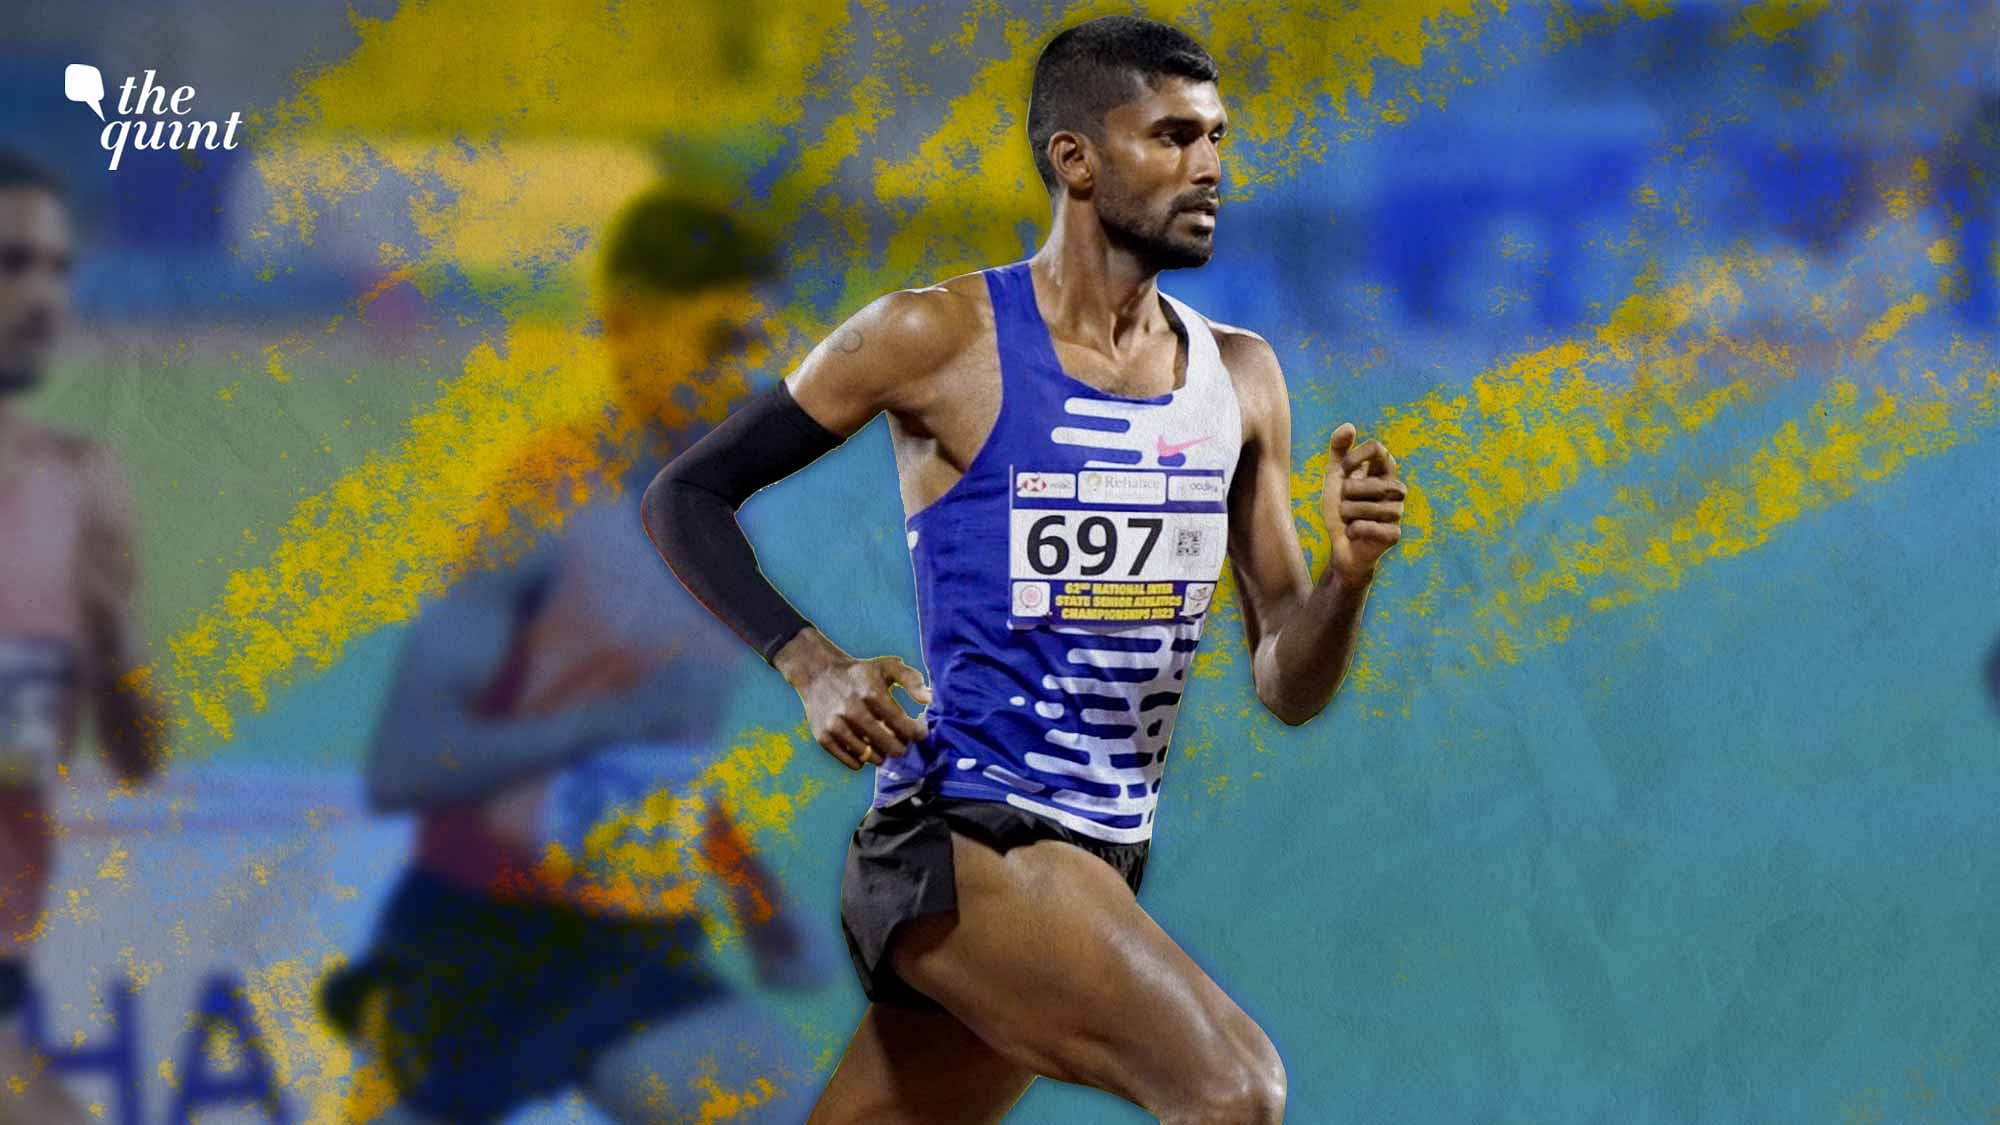 <div class="paragraphs"><p>The story of India's national record-holding middle-distance runner, Jinson Johnson.</p></div>